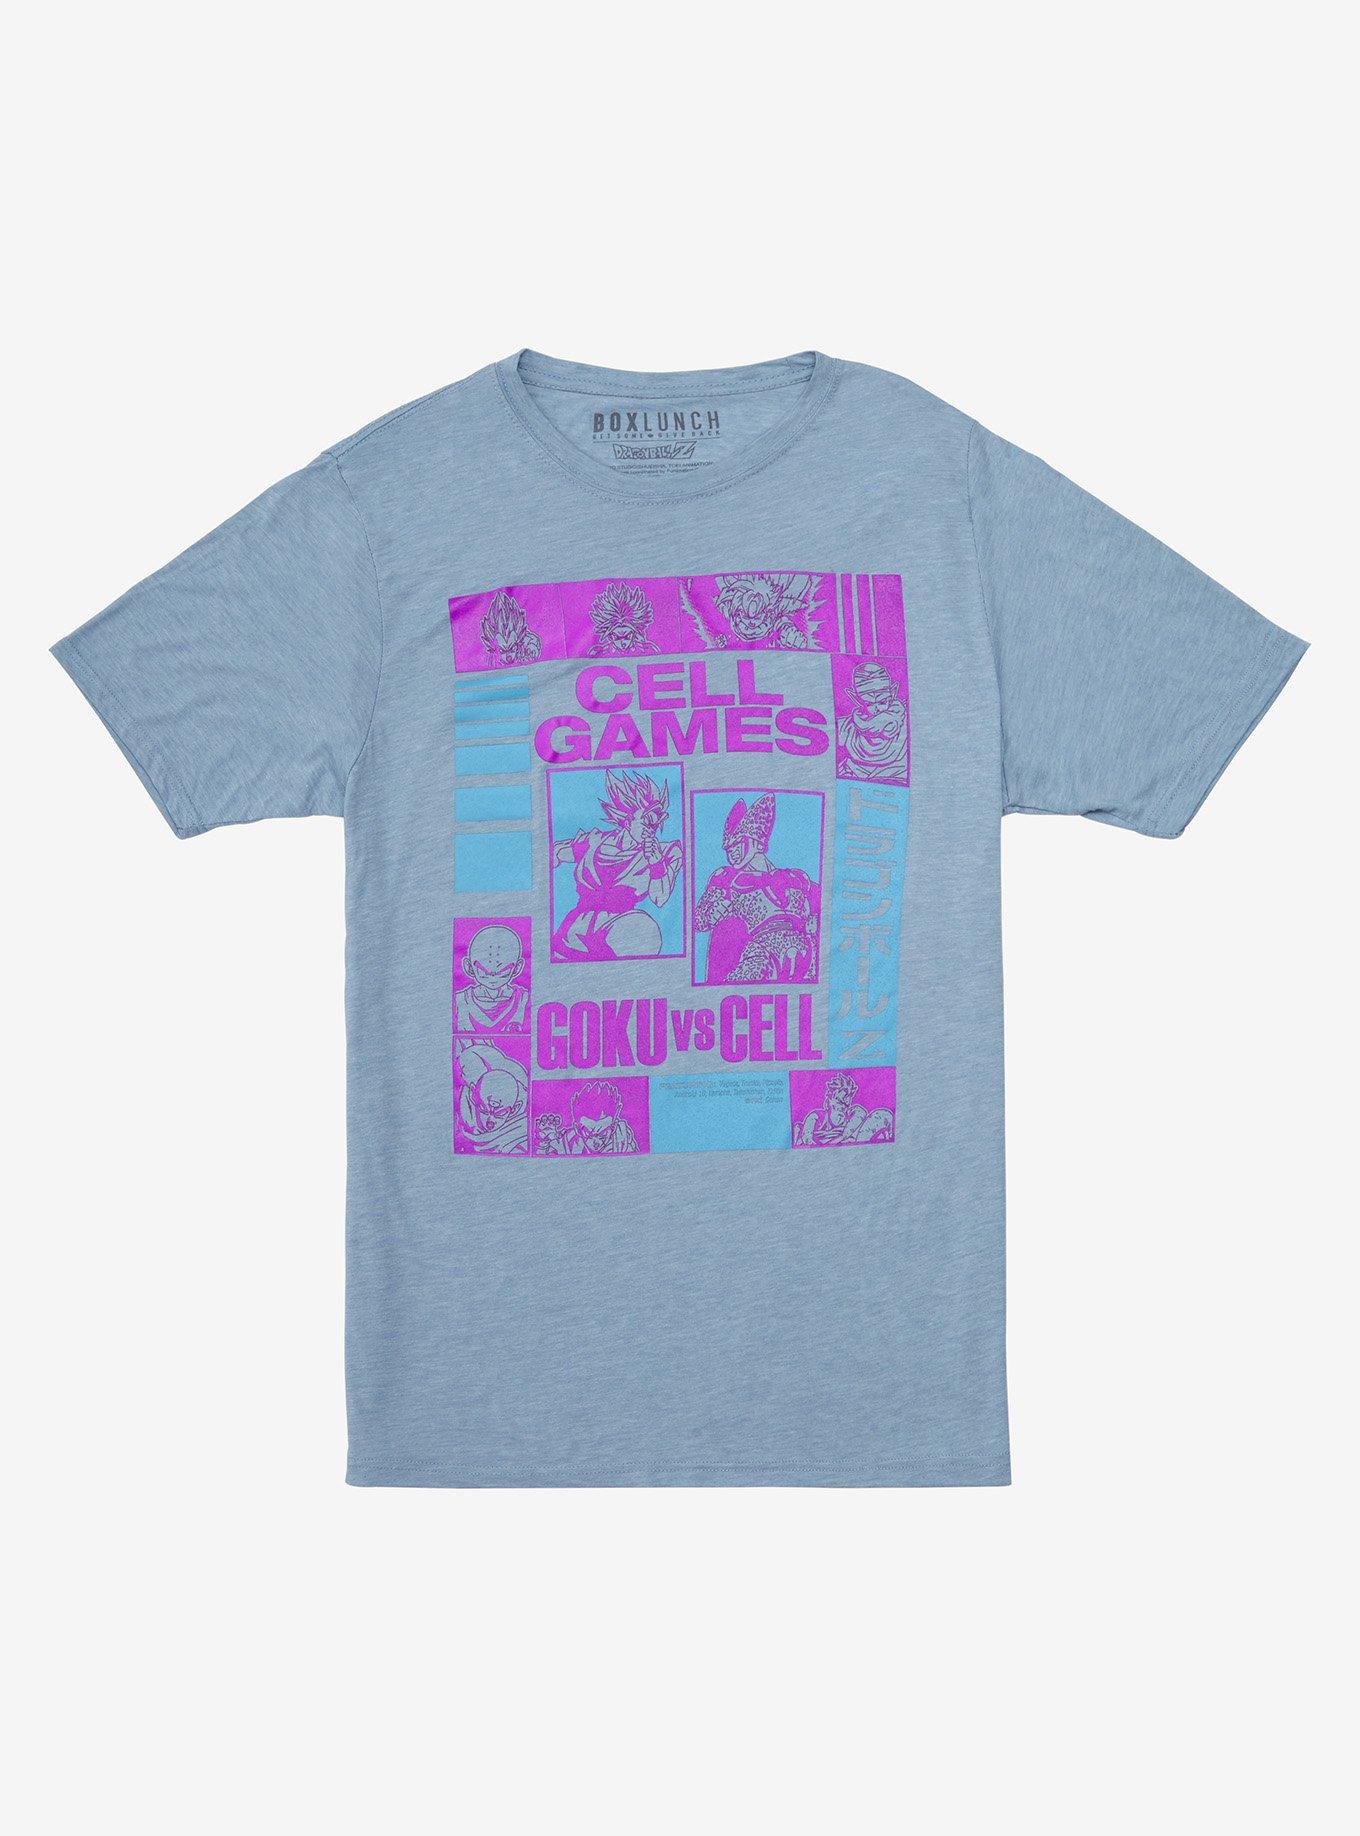 Dragon Ball Z Cell Games T-Shirt - BoxLunch Exclusive, GREY, hi-res